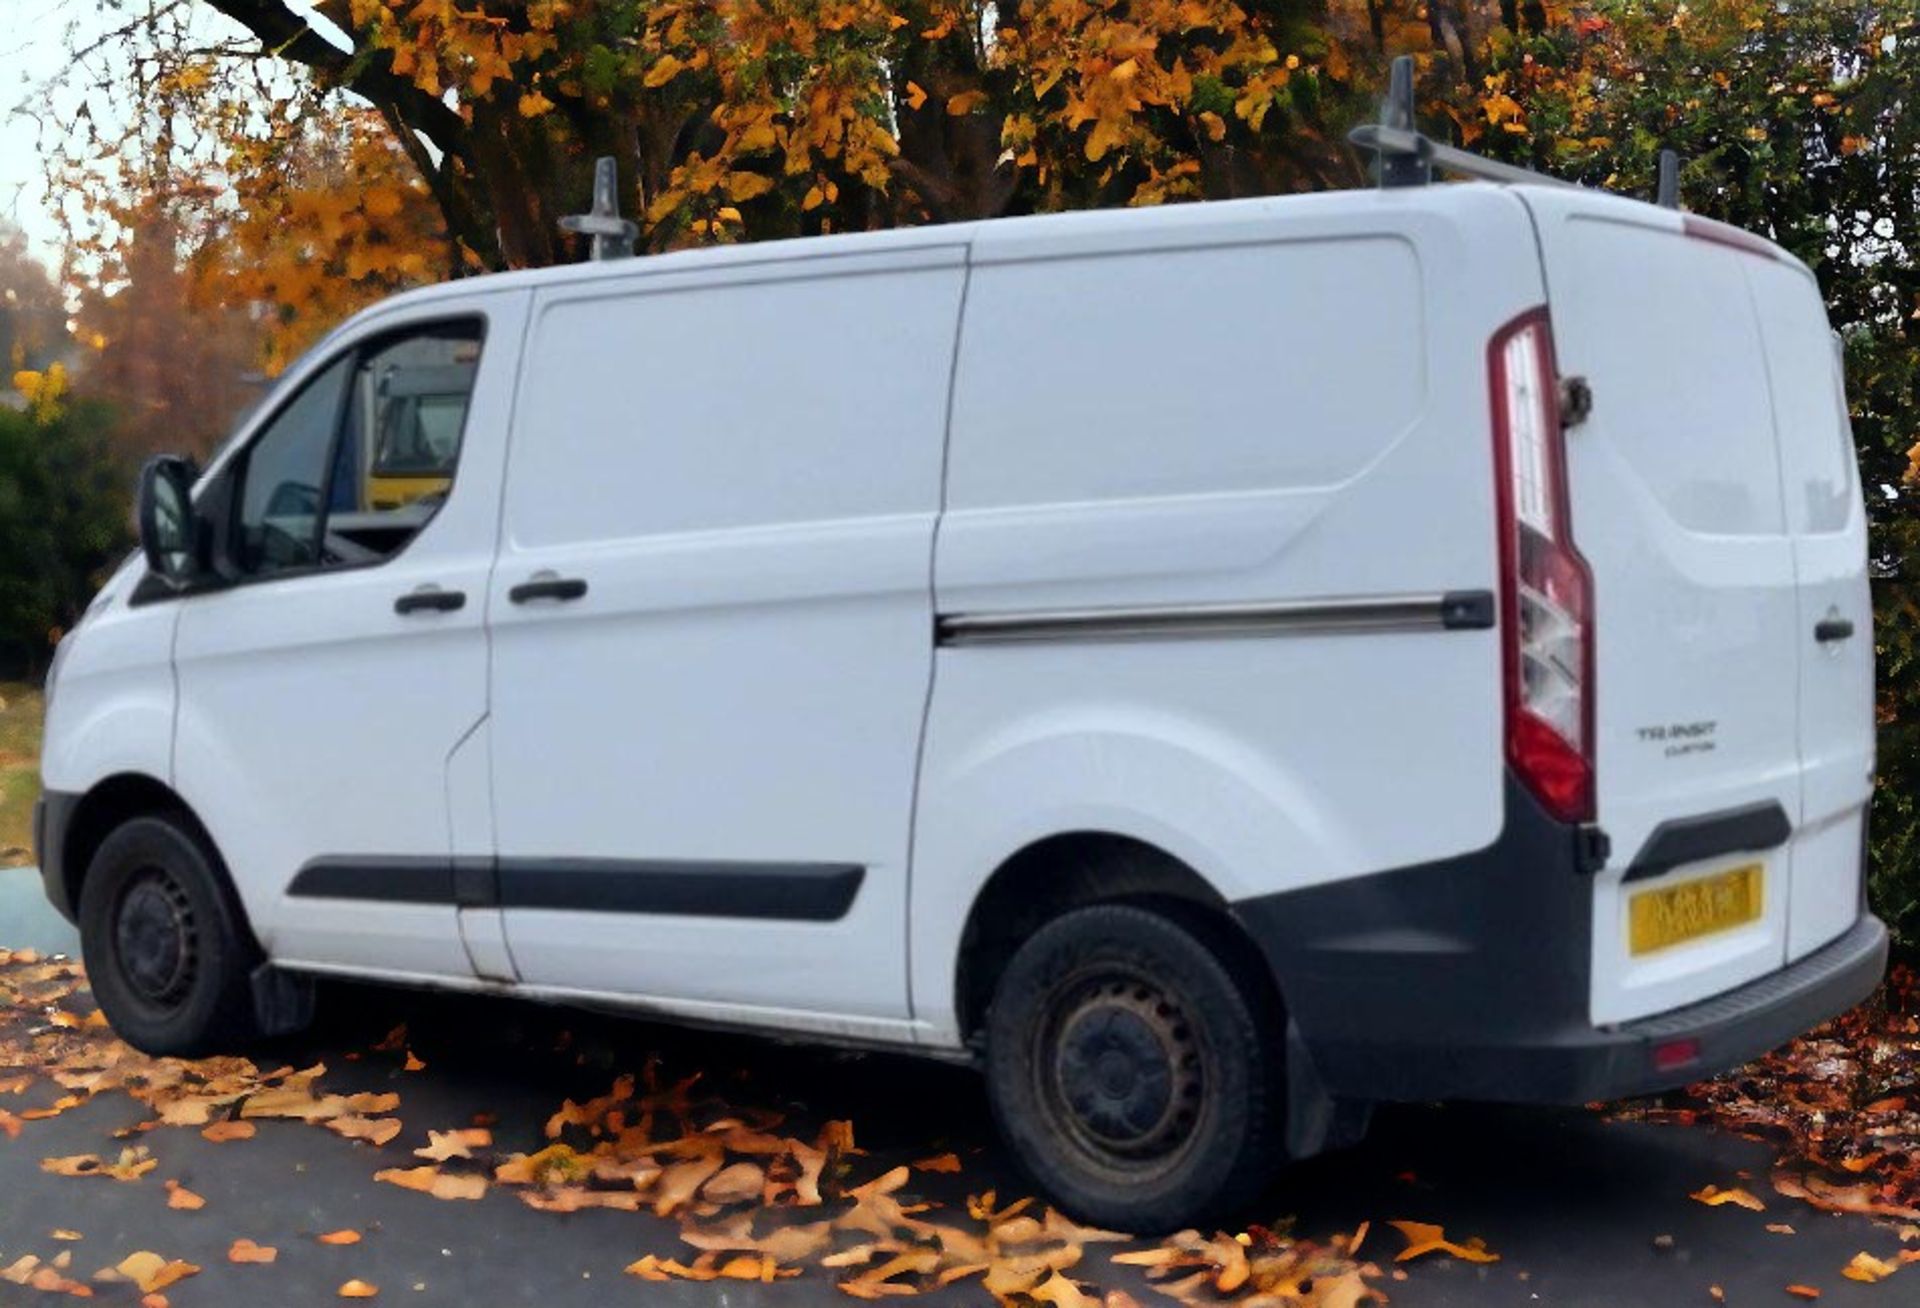 2015 FORD TRANSIT CUSTOM PANEL VAN - RELIABLE AND EFFICIENT WORKHORSE - Image 8 of 17